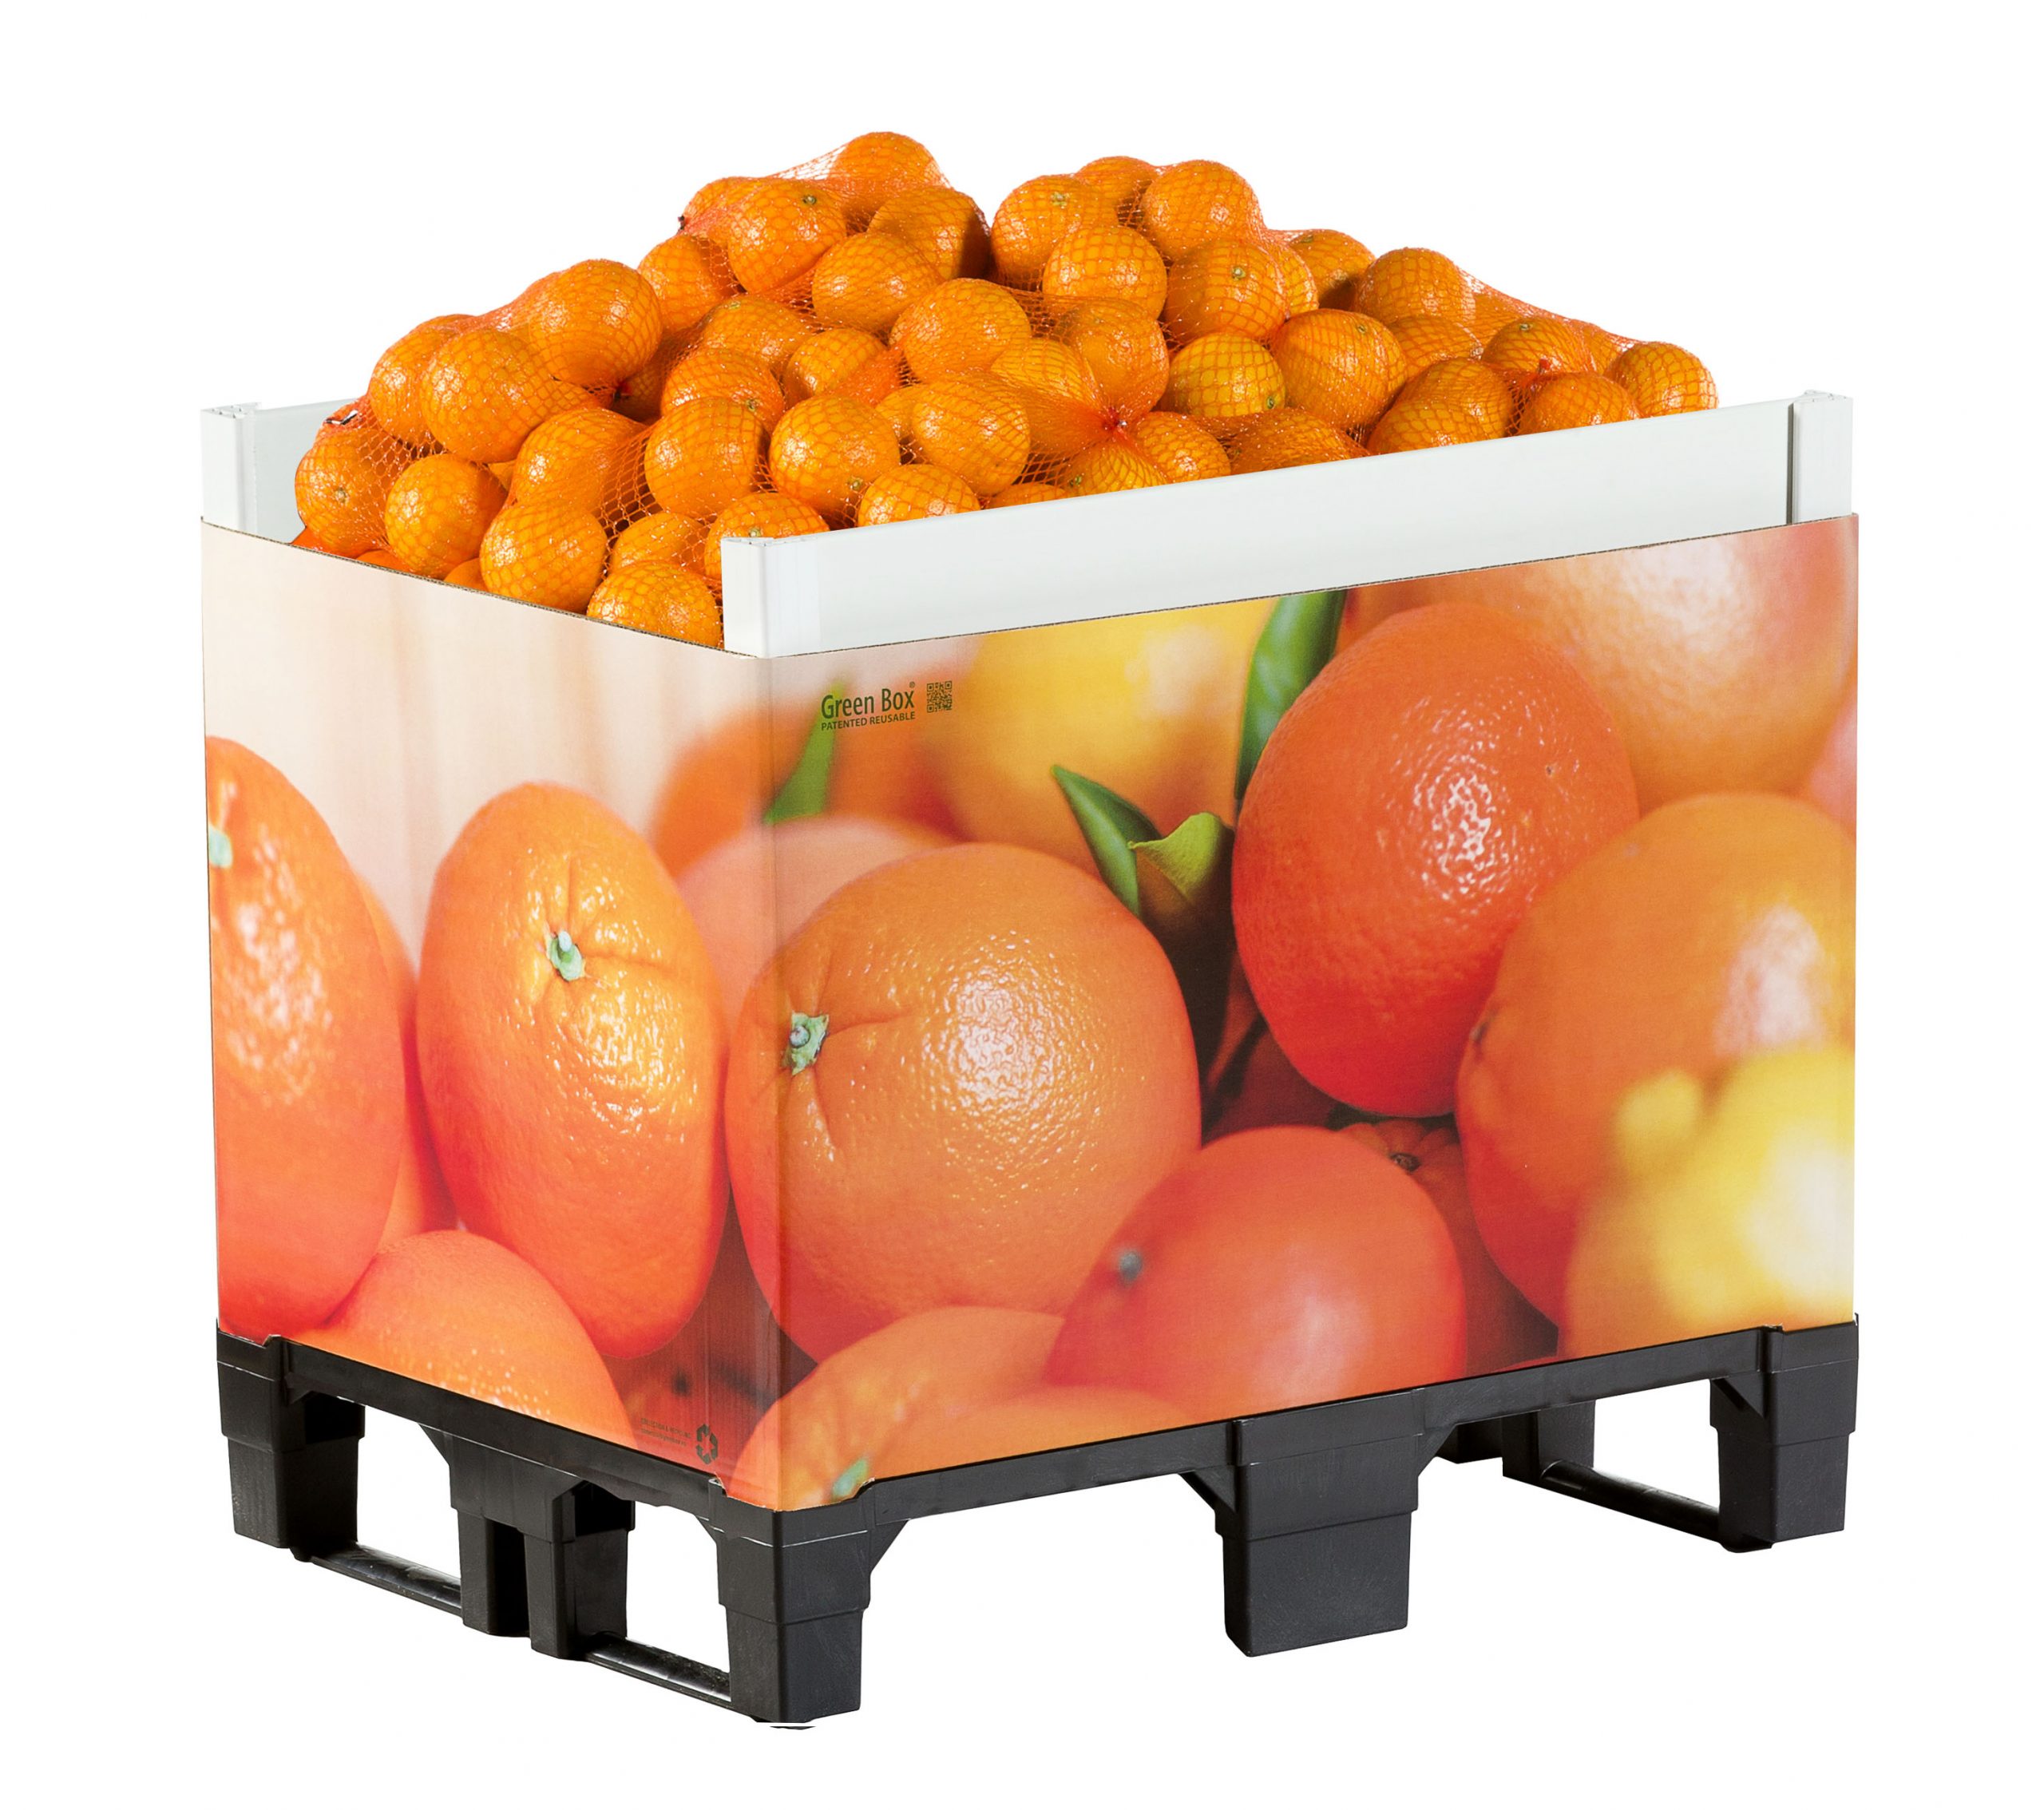 Green Box, which is currently available as models G100, G70 and G50, with respective product capacities of 180 kg, 120 kg and 80 kg, can be seen in supermarkets across Europe